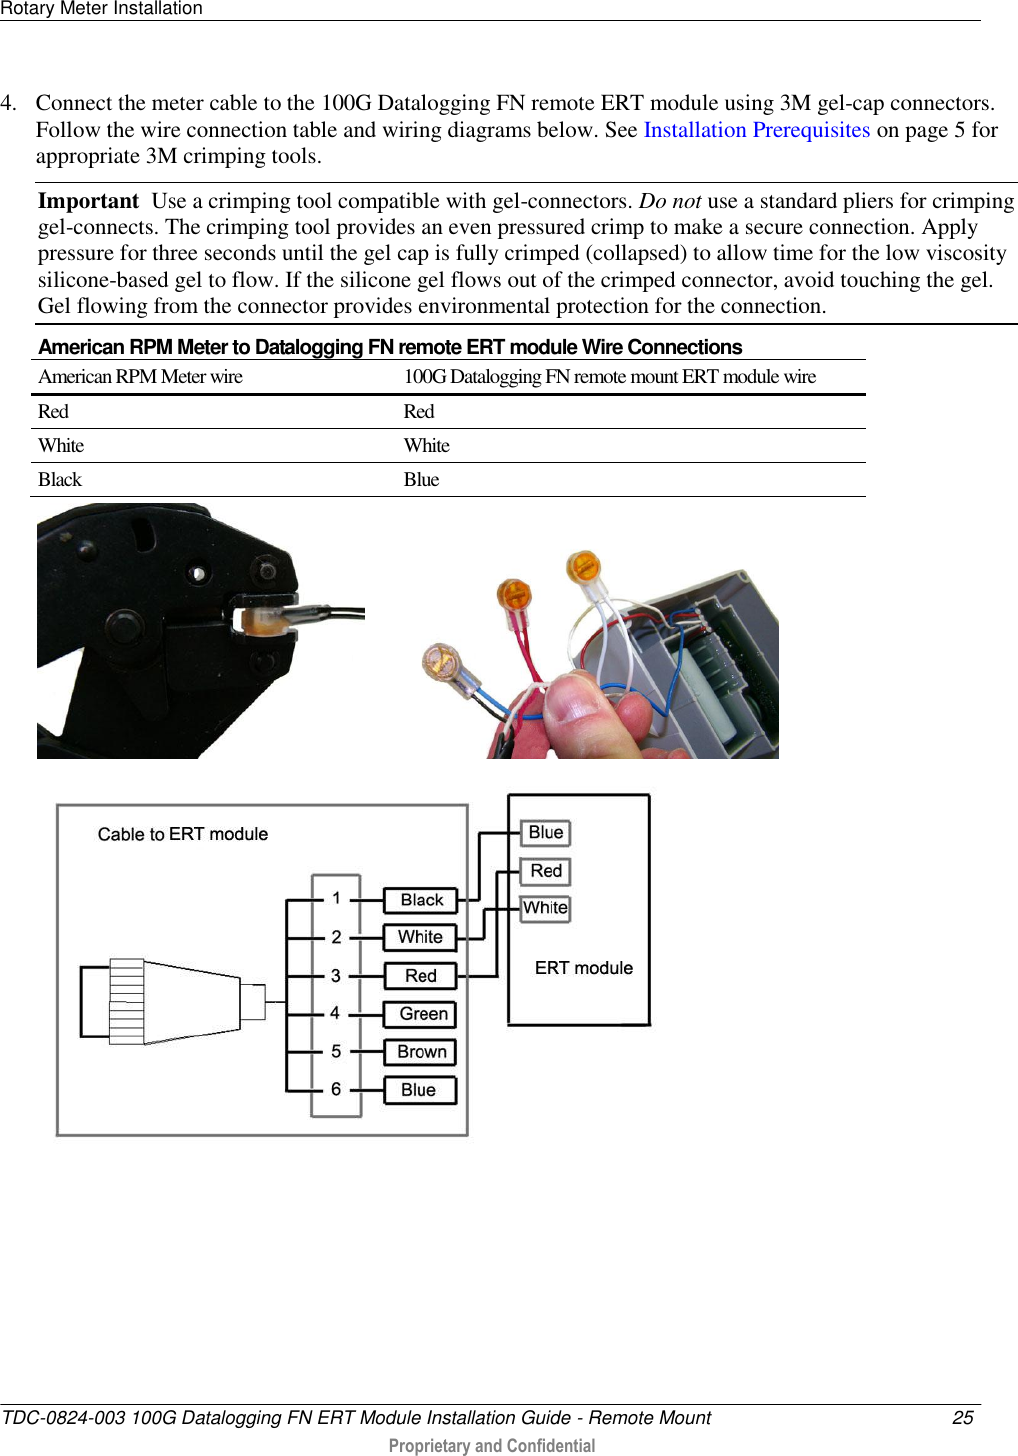 Rotary Meter Installation   TDC-0824-003 100G Datalogging FN ERT Module Installation Guide - Remote Mount  25   Proprietary and Confidential     4. Connect the meter cable to the 100G Datalogging FN remote ERT module using 3M gel-cap connectors. Follow the wire connection table and wiring diagrams below. See Installation Prerequisites on page 5 for appropriate 3M crimping tools. Important  Use a crimping tool compatible with gel-connectors. Do not use a standard pliers for crimping gel-connects. The crimping tool provides an even pressured crimp to make a secure connection. Apply pressure for three seconds until the gel cap is fully crimped (collapsed) to allow time for the low viscosity silicone-based gel to flow. If the silicone gel flows out of the crimped connector, avoid touching the gel. Gel flowing from the connector provides environmental protection for the connection.  American RPM Meter to Datalogging FN remote ERT module Wire Connections American RPM Meter wire 100G Datalogging FN remote mount ERT module wire Red Red White White Black Blue                  